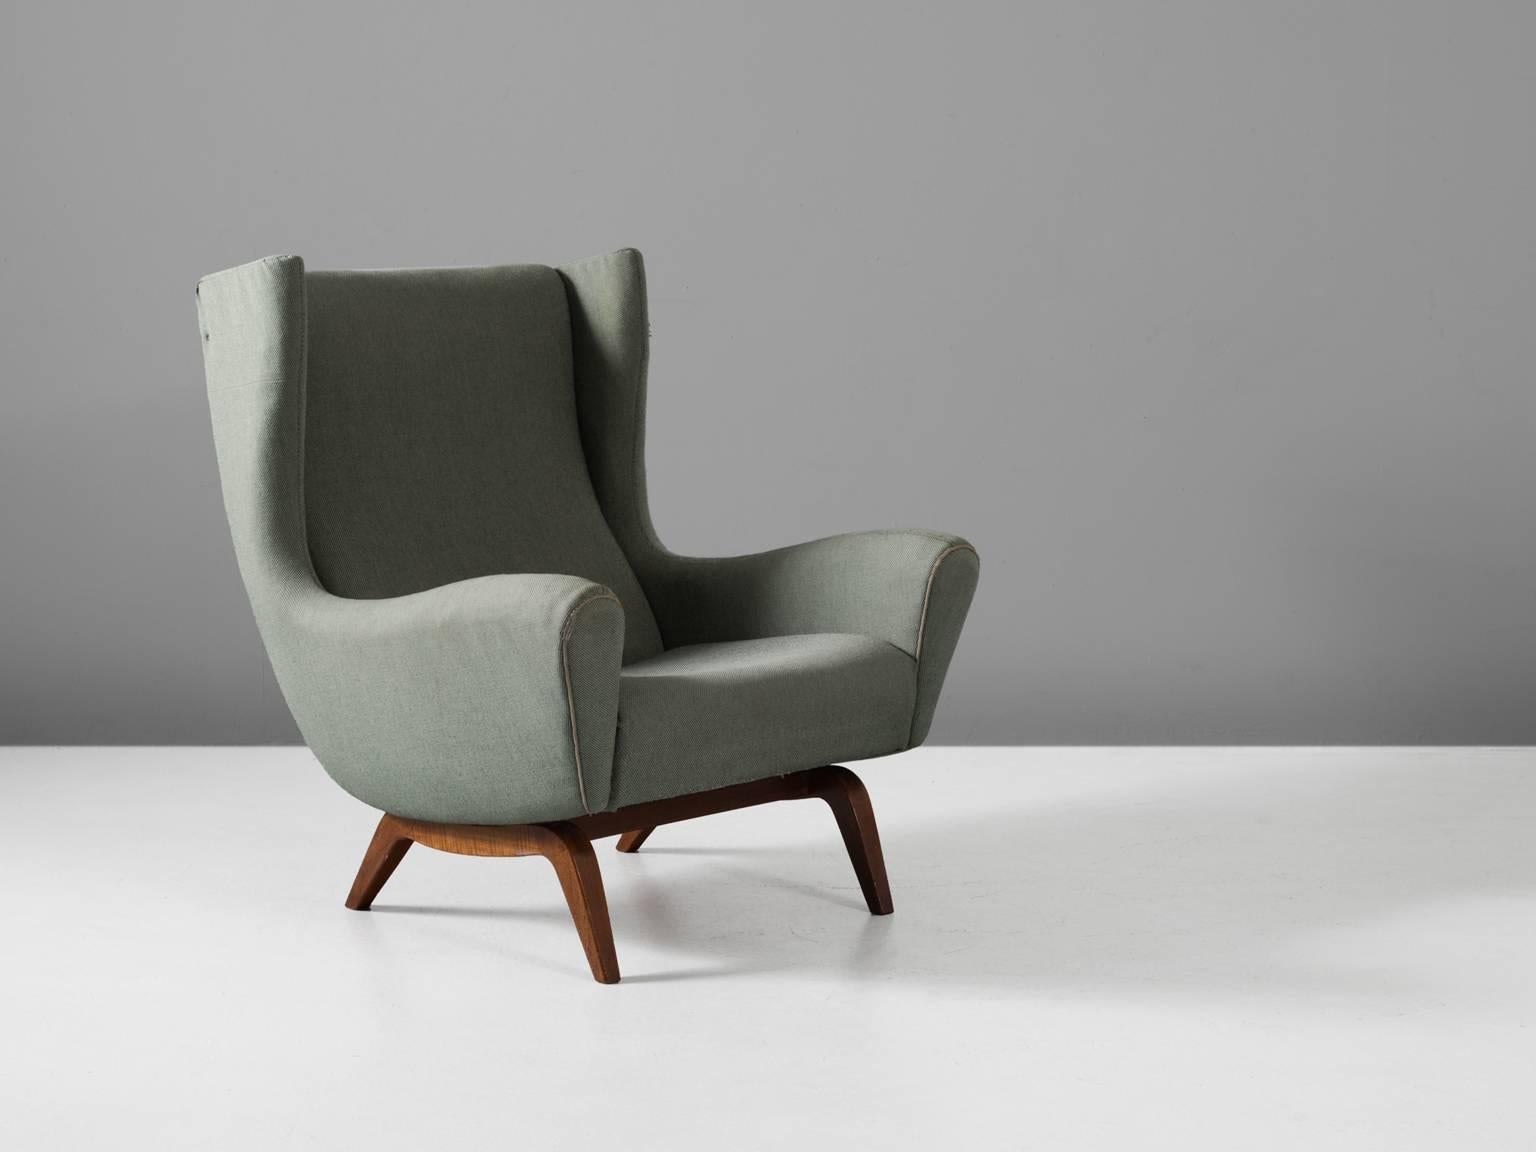 Lounge chair model 110, in teak and fabric by Illum Wikkelsø for Søren Willadsen, Denmark, 1950s.

This well-designed armchair shows an unusual elegance and great eye for detail, combined with outstanding craftsmanship, which is characteristic for